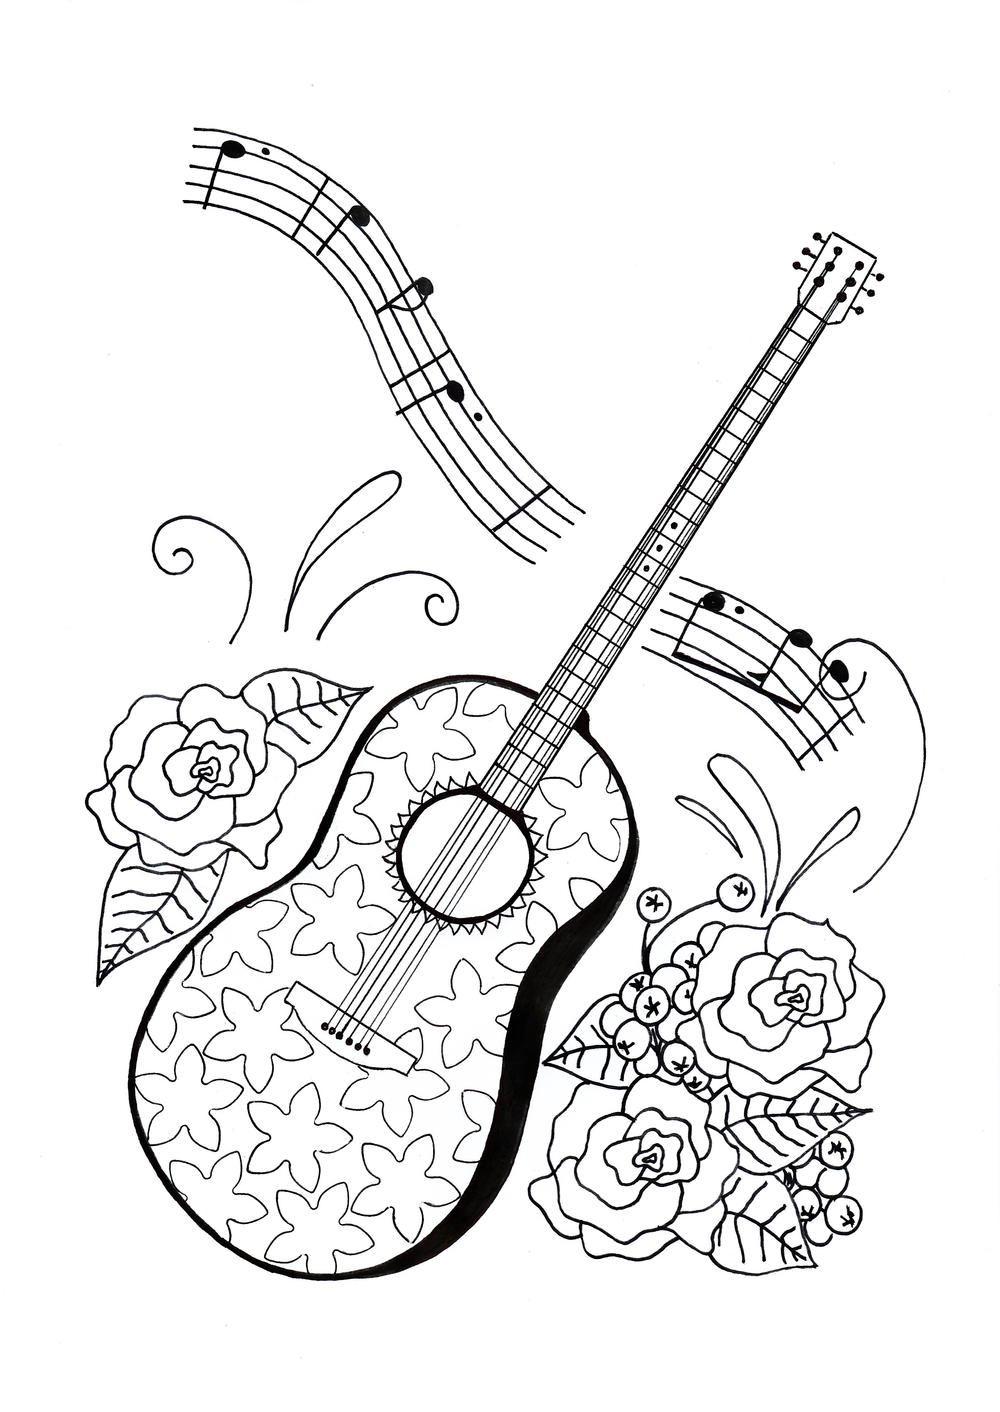 For the Love of Music Adult Coloring Page FaveCraftscom